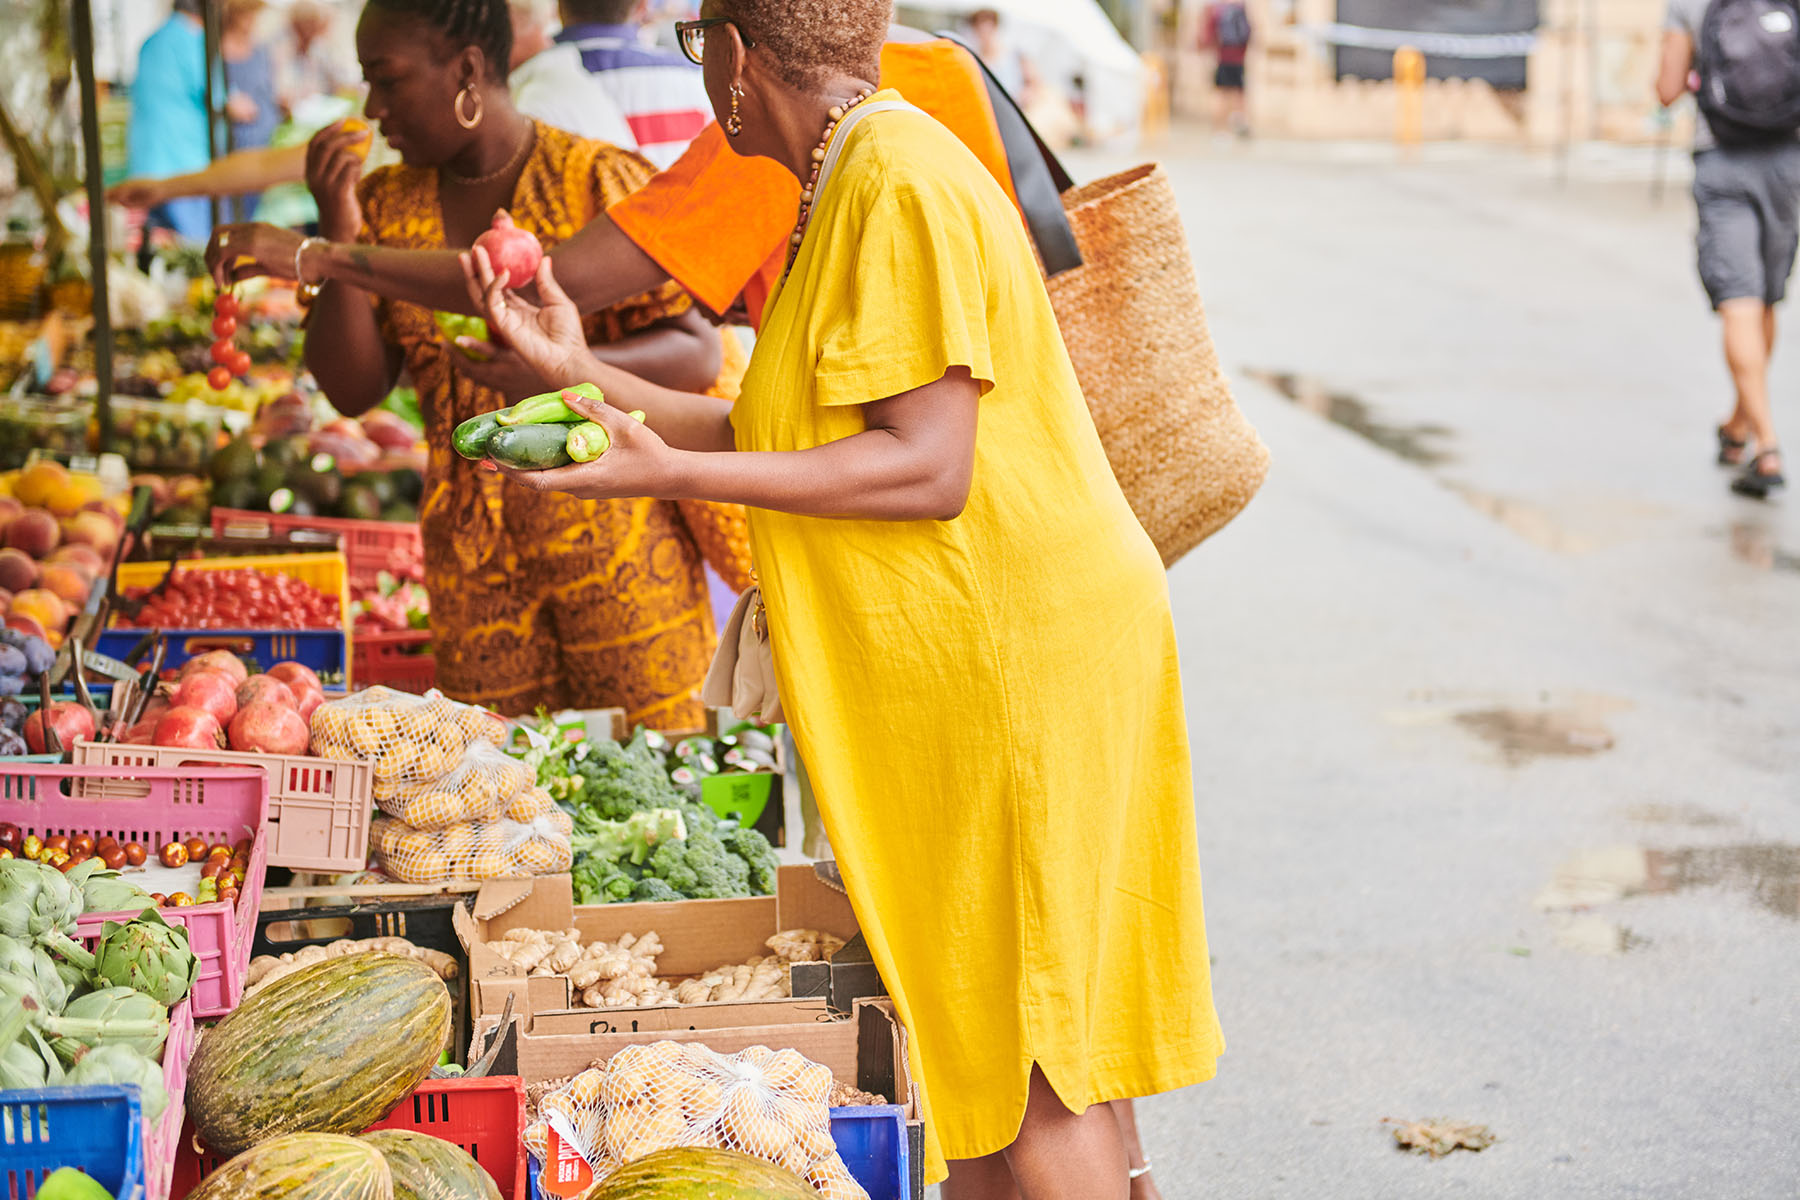 Woman in a yellow dress looking at a pomegranate and cucumbers at a veggie market stall.